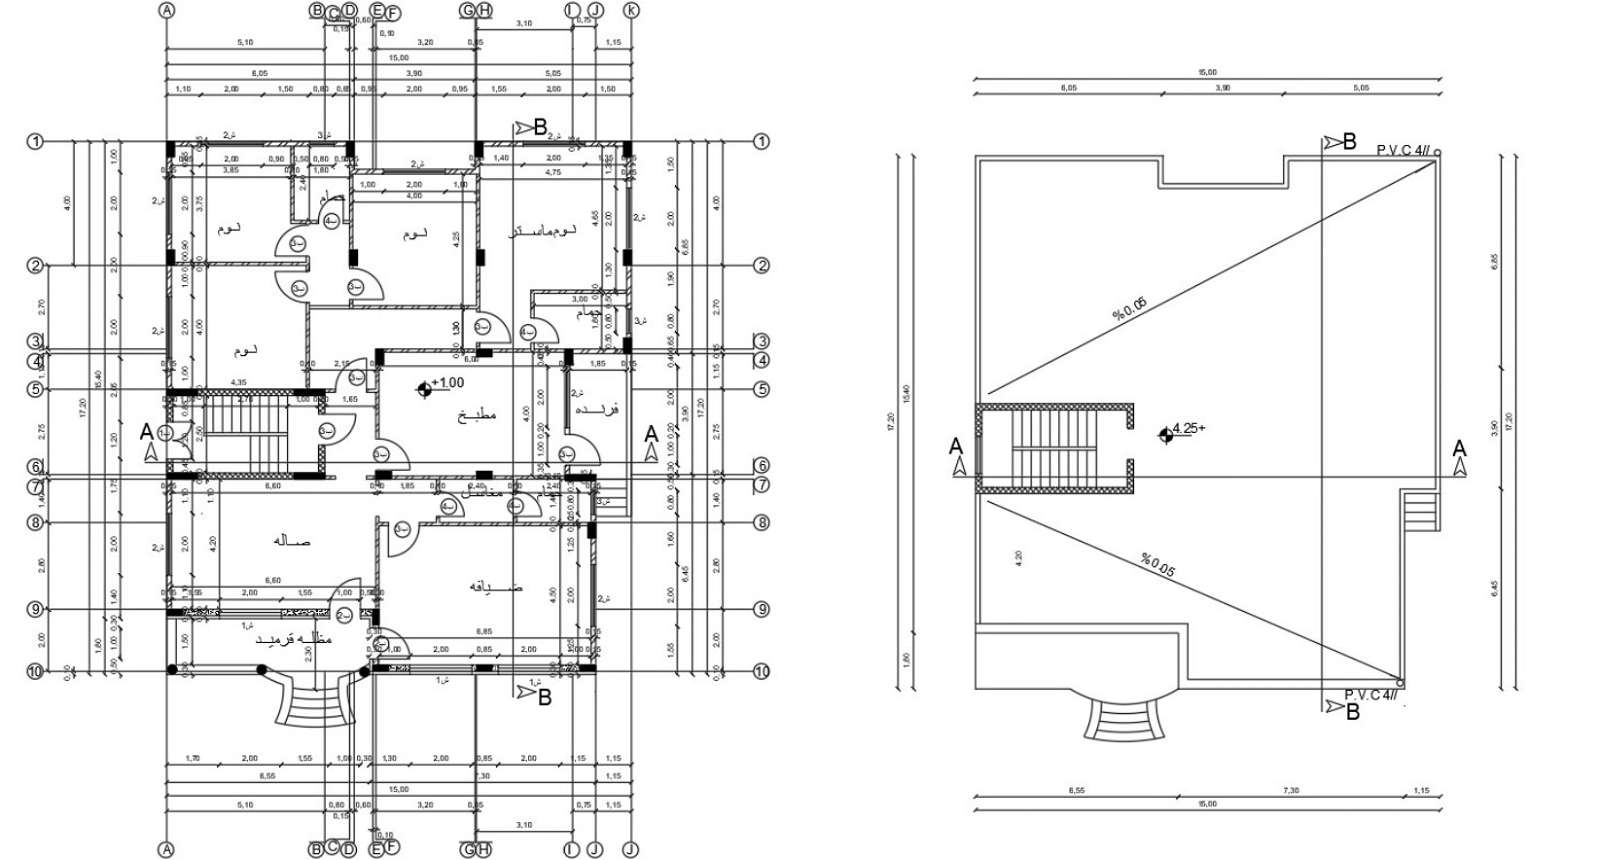 Autocad Plan drawing from photo Part 1-Layout plan - YouTube